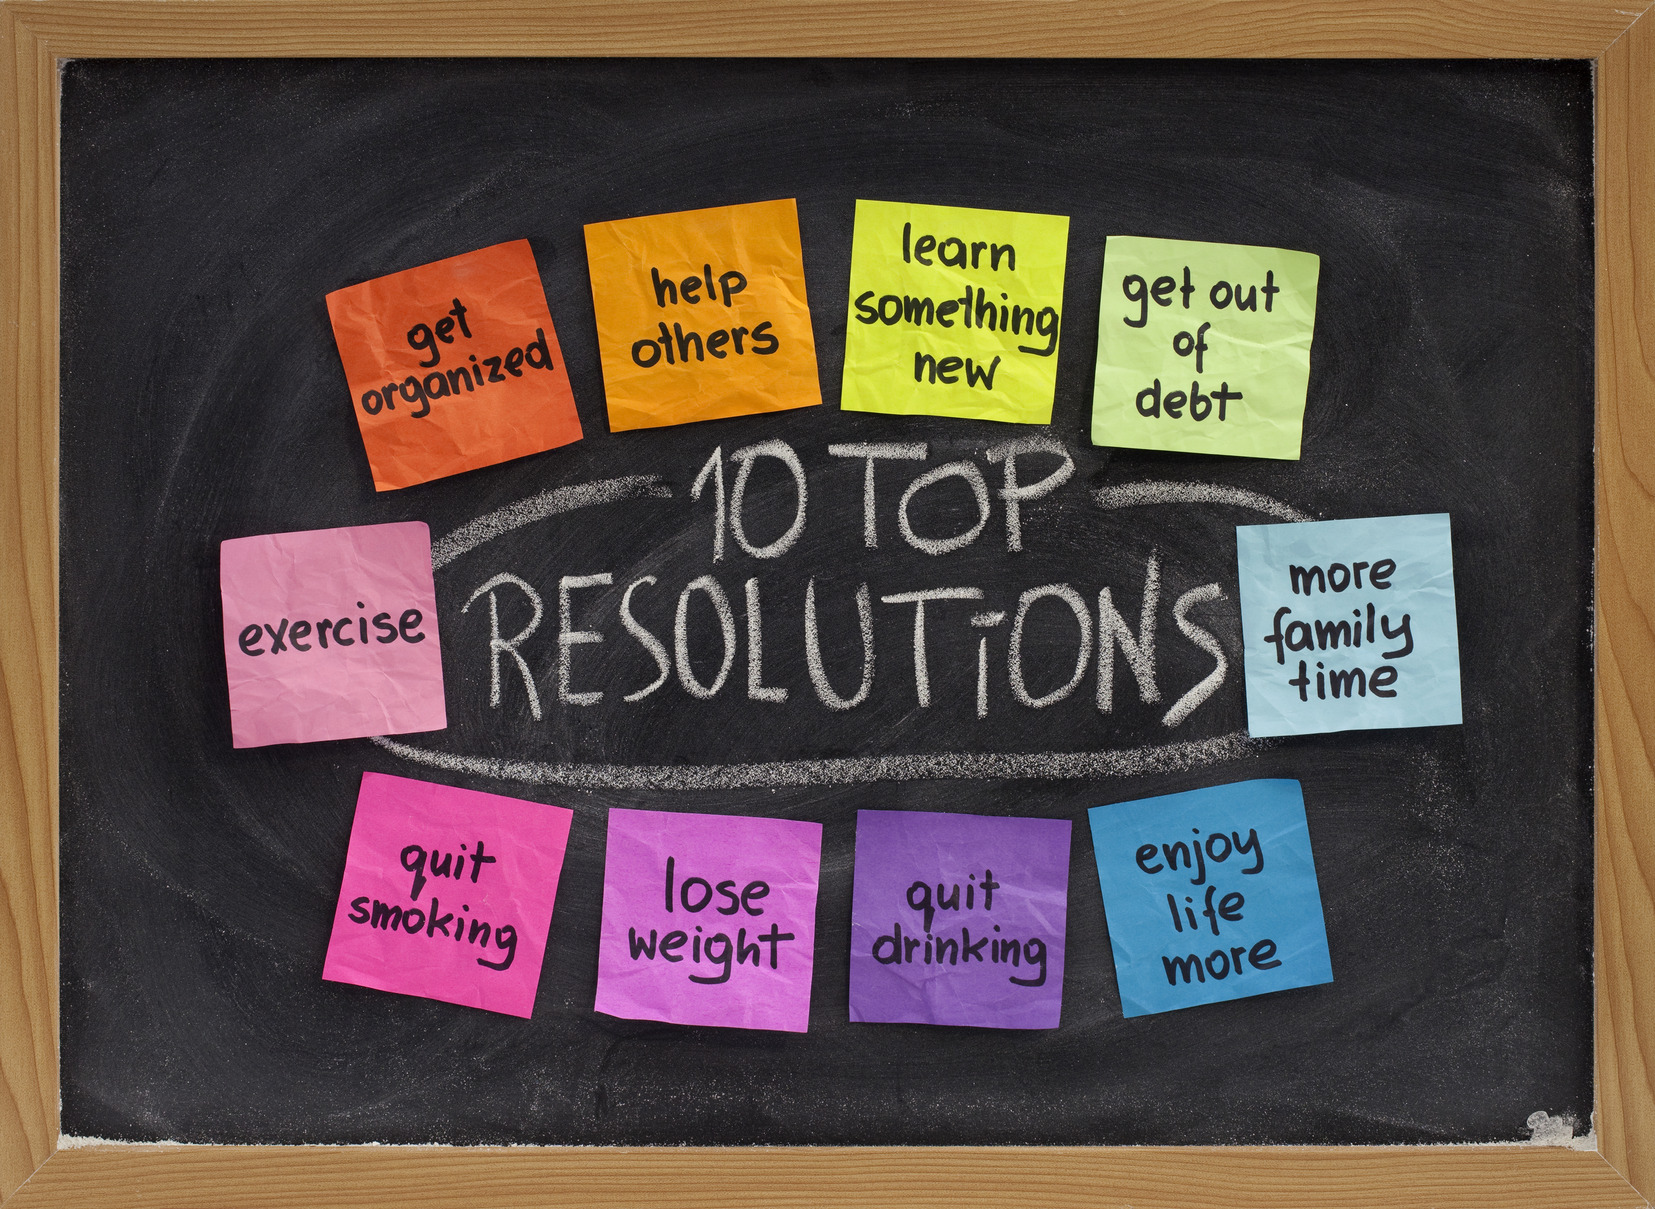 Daily Parentables: My New Year’s Resolutions